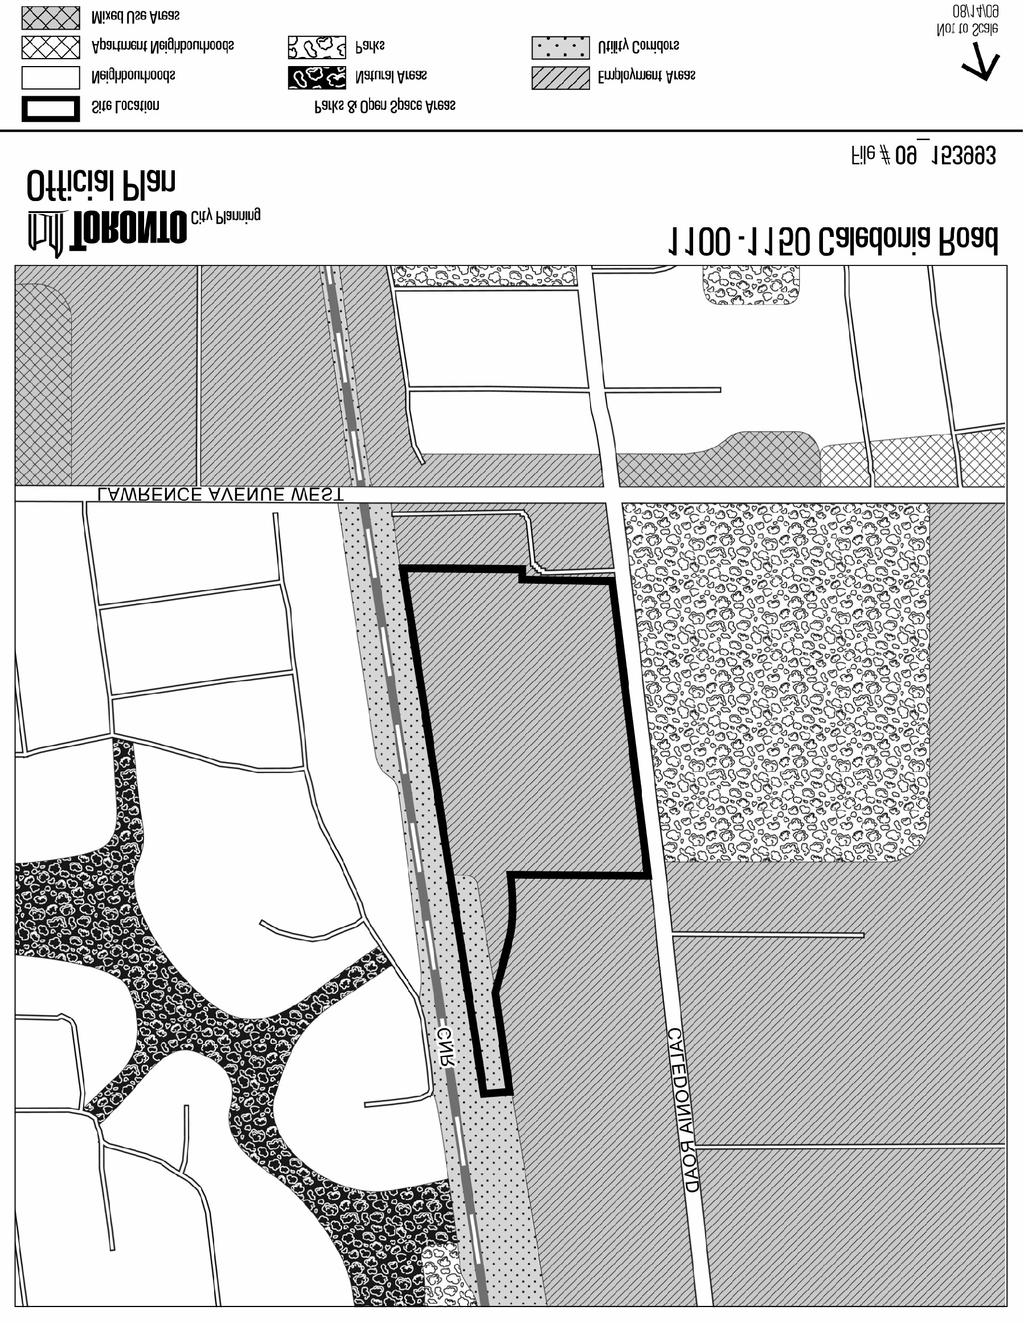 Attachment 2: Official Plan Land Use Plan Staff report for